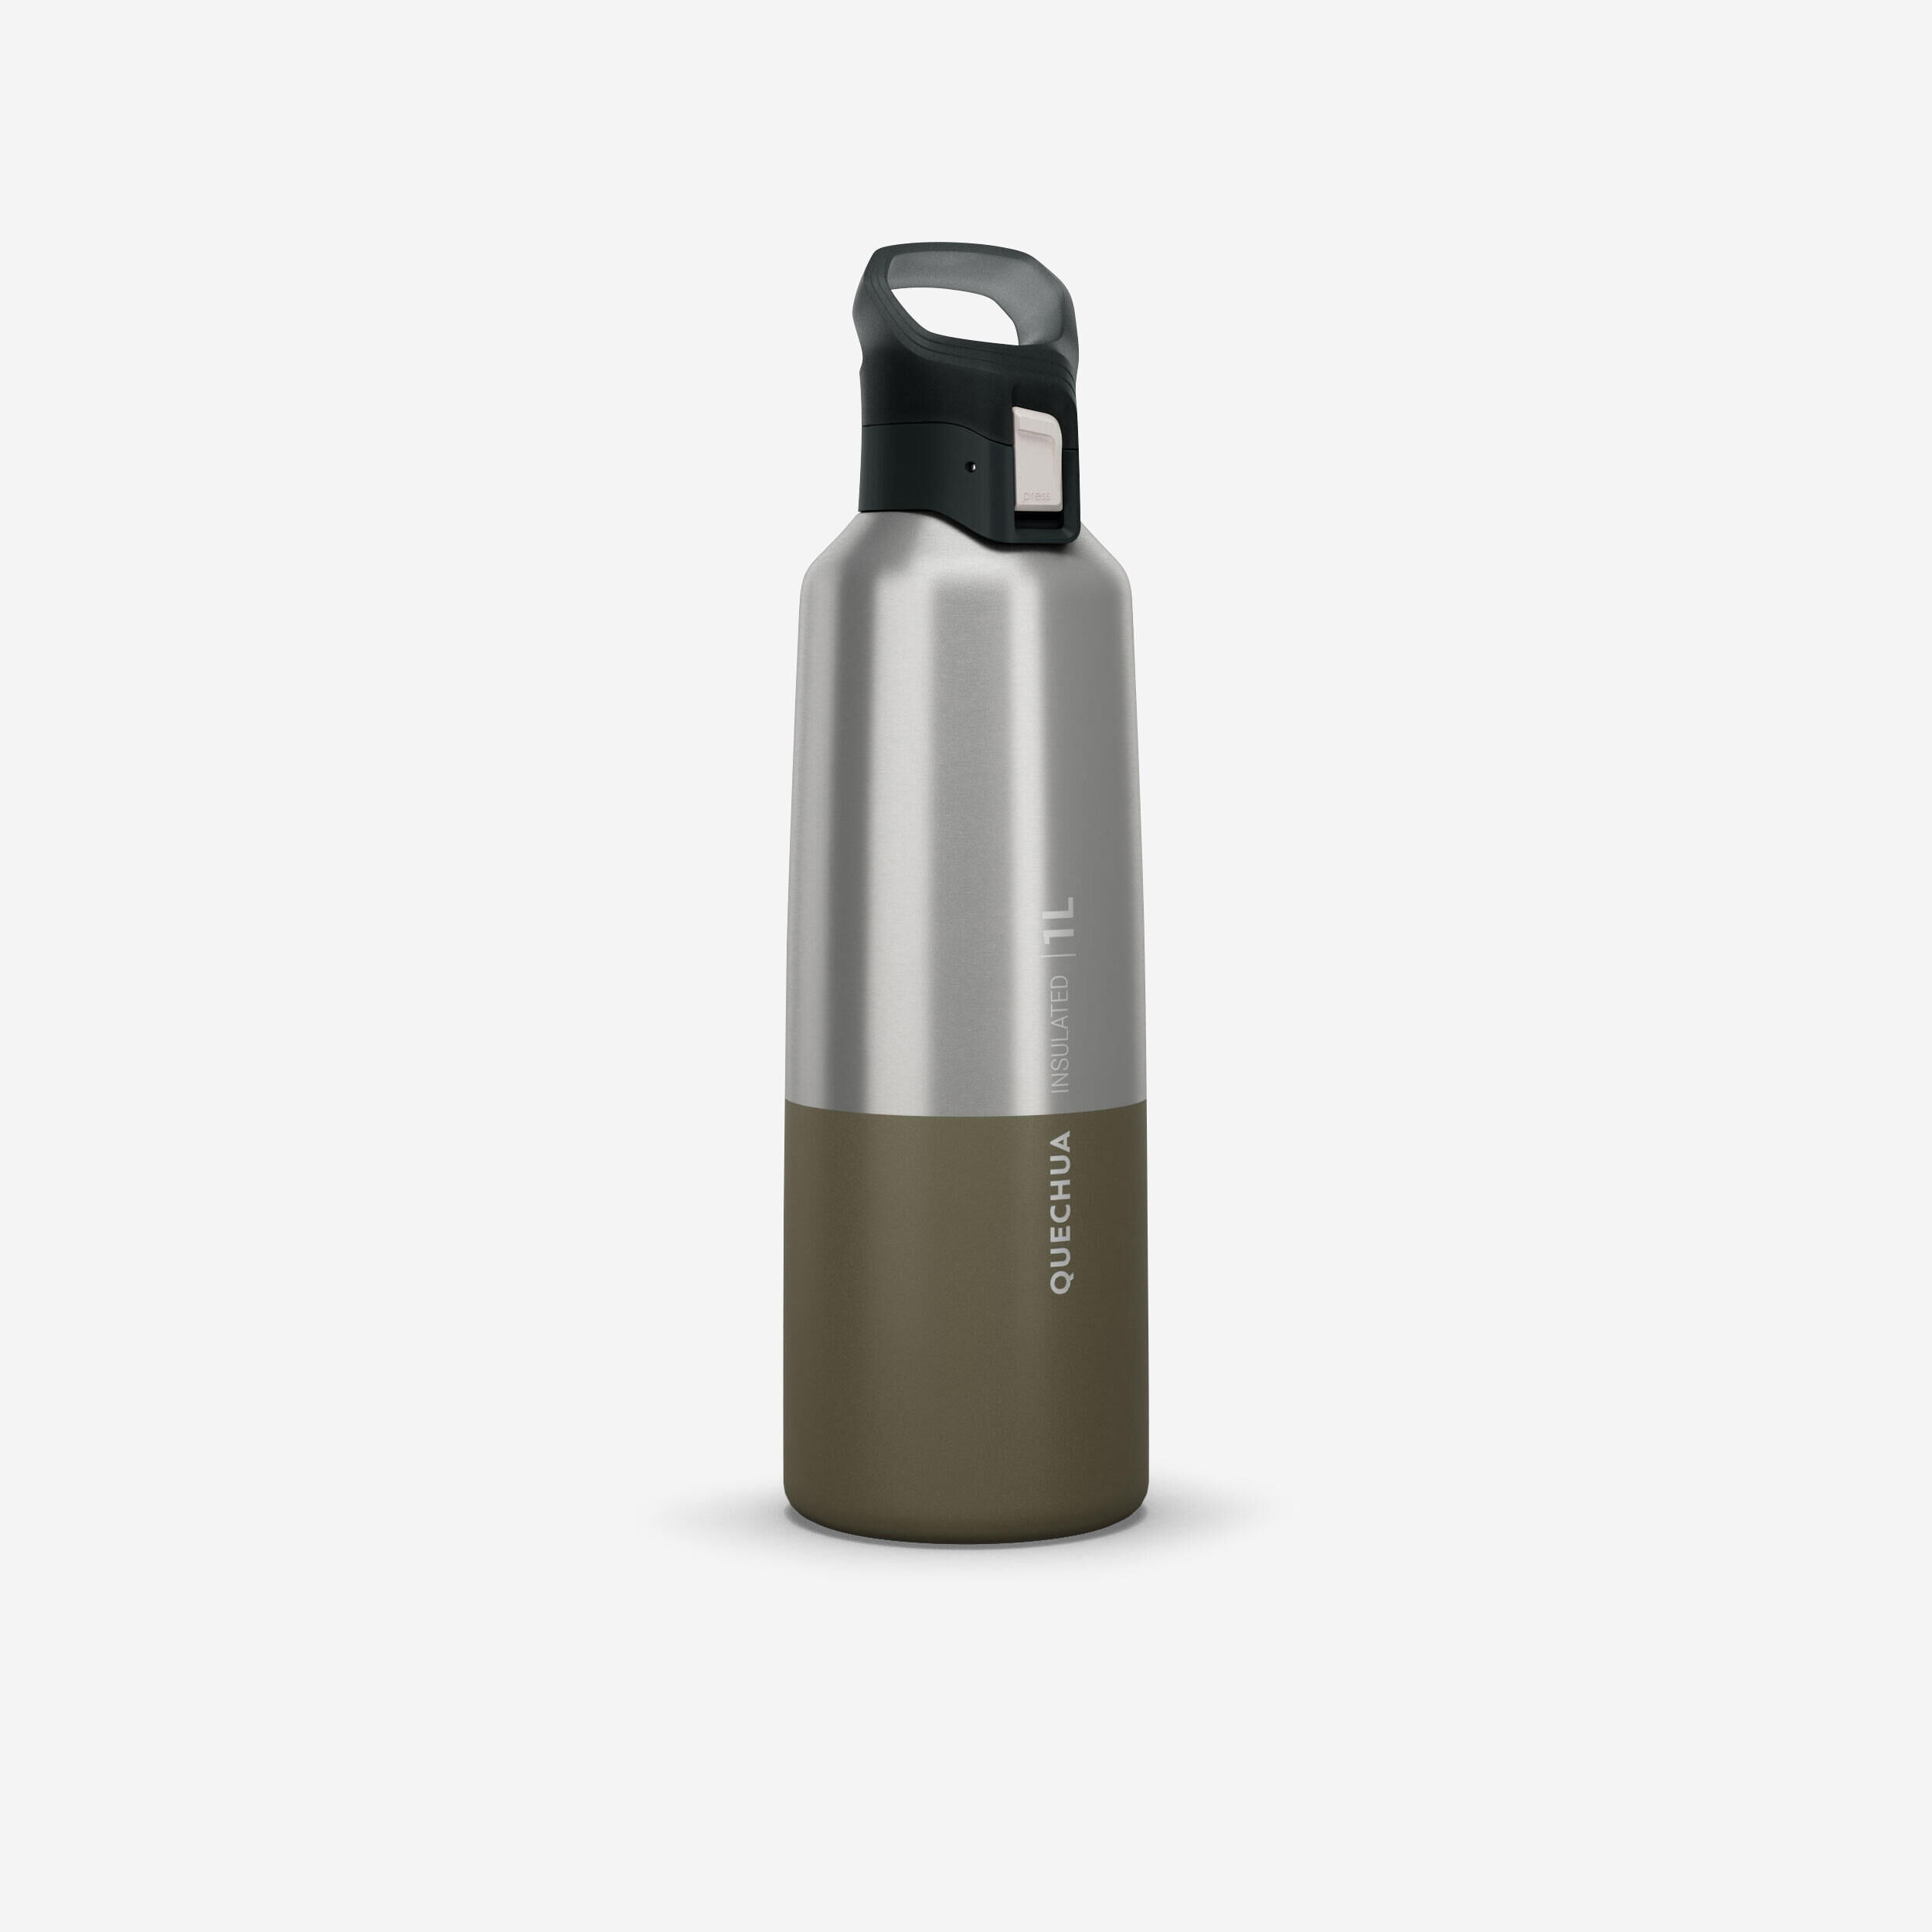 QUECHUA 1 L stainless steel water bottle with quick-open cap for hiking - Khaki